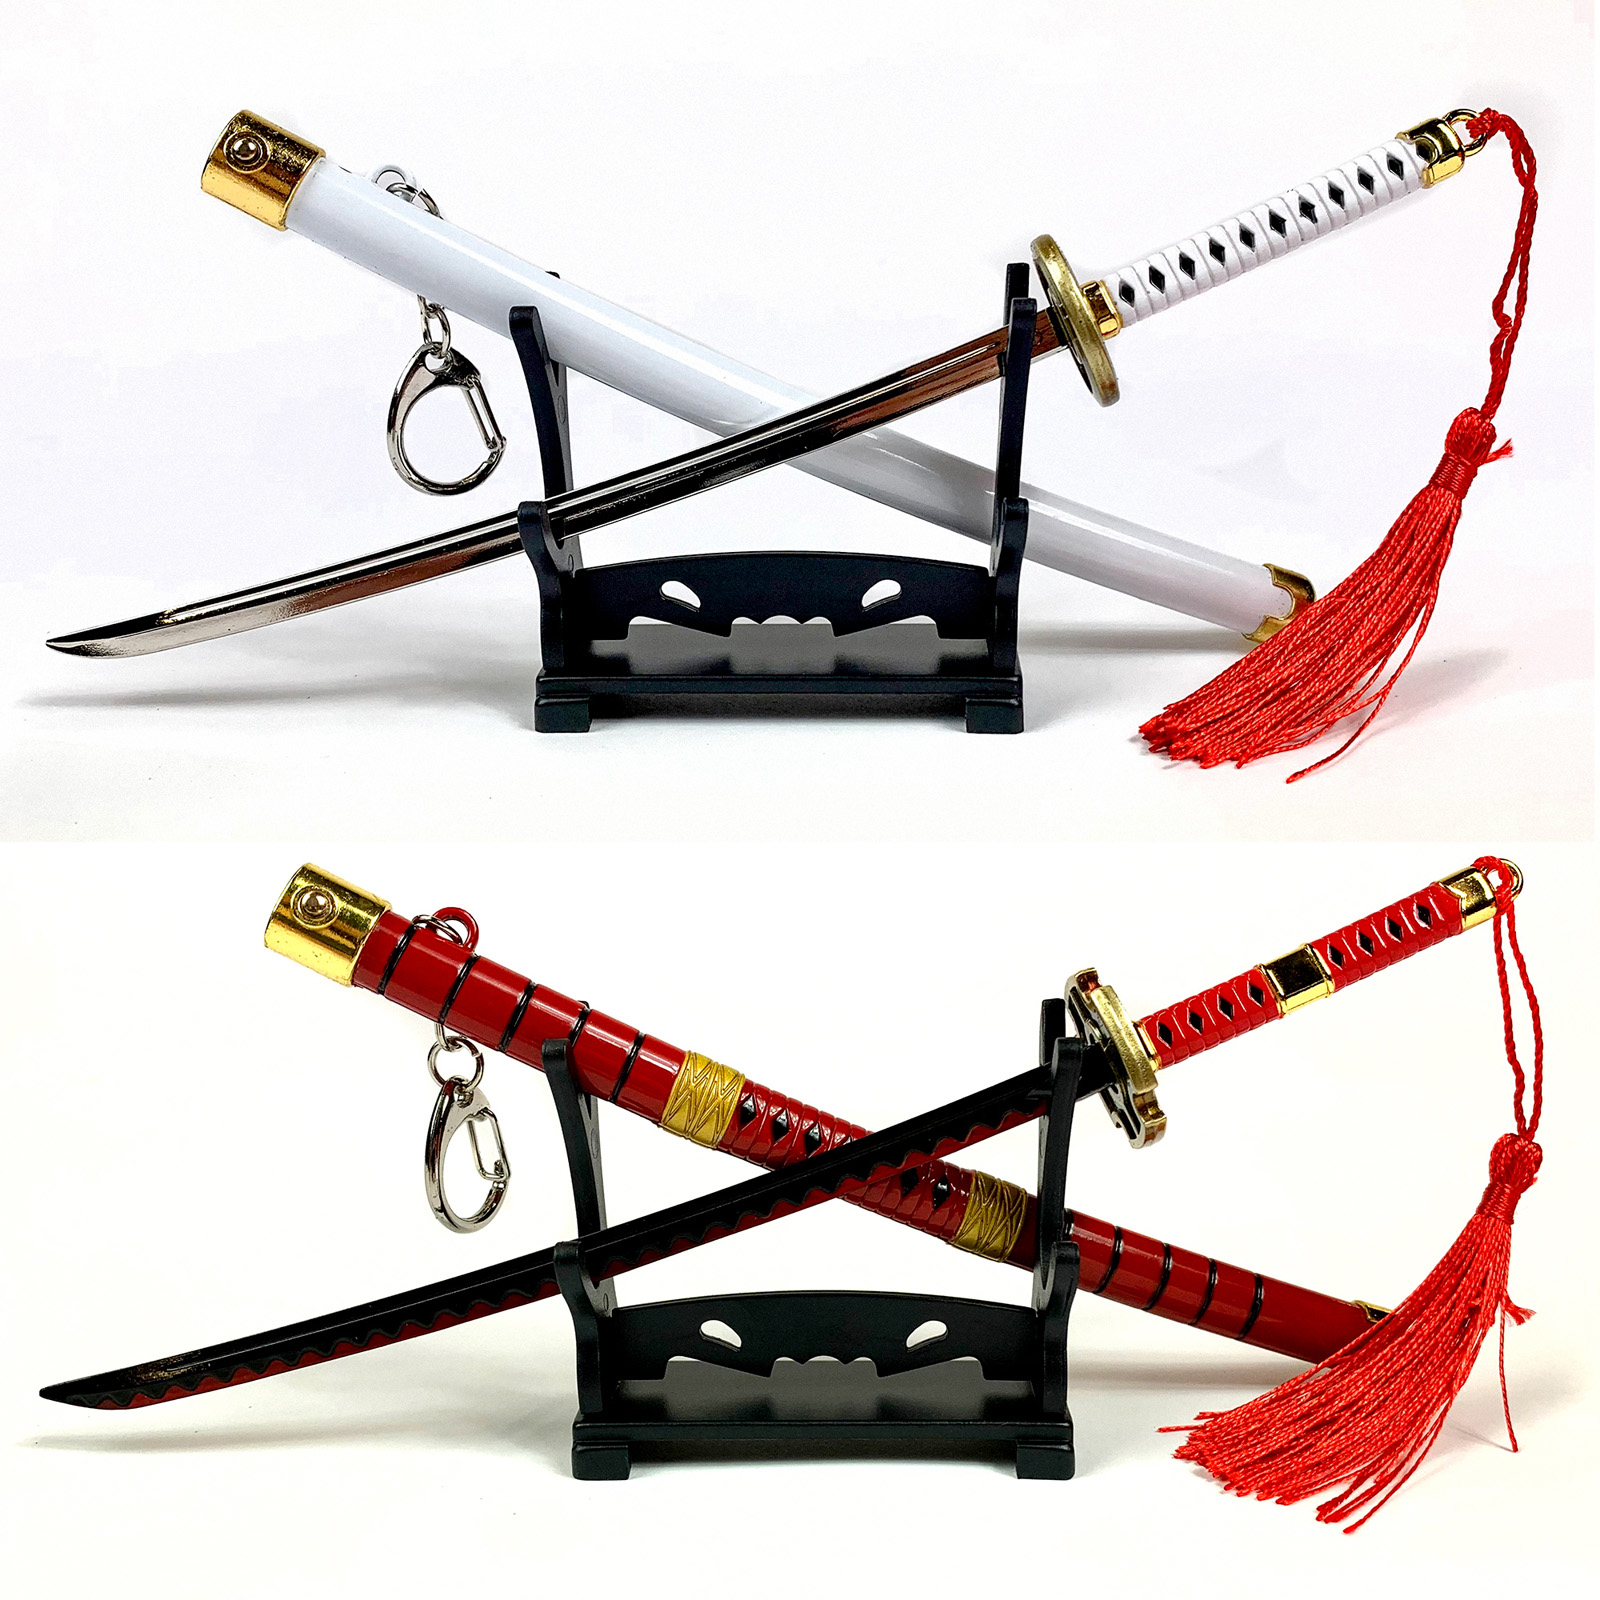 One piece set with 4 letter openers, including 4 stands and case